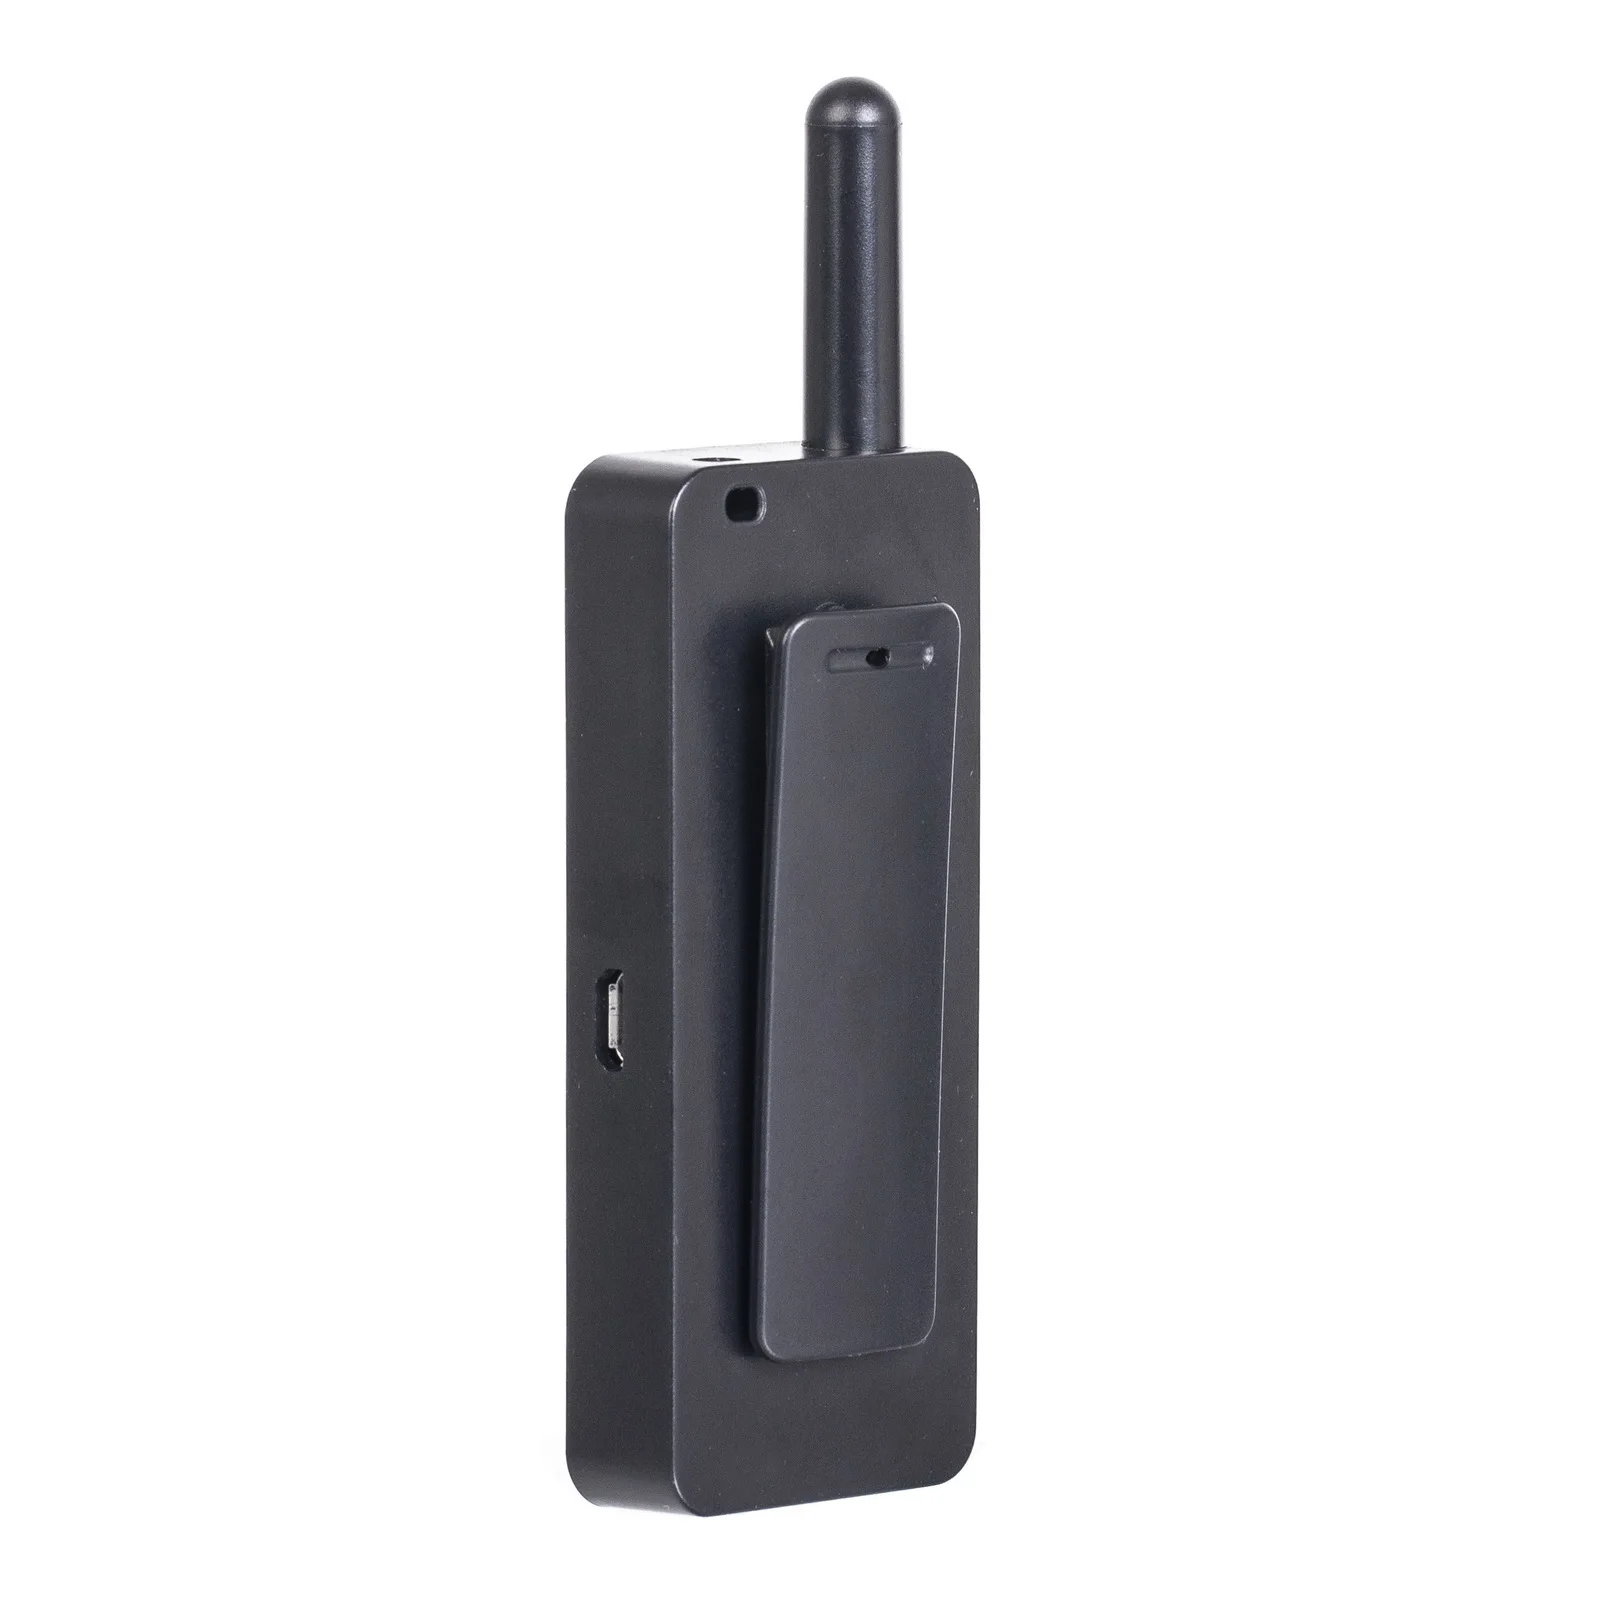 HT-108 Portable Mini Walkie-Talkie Rechargeable with Handset Small and Light,Large-Capacity Lithium Battery enlarge